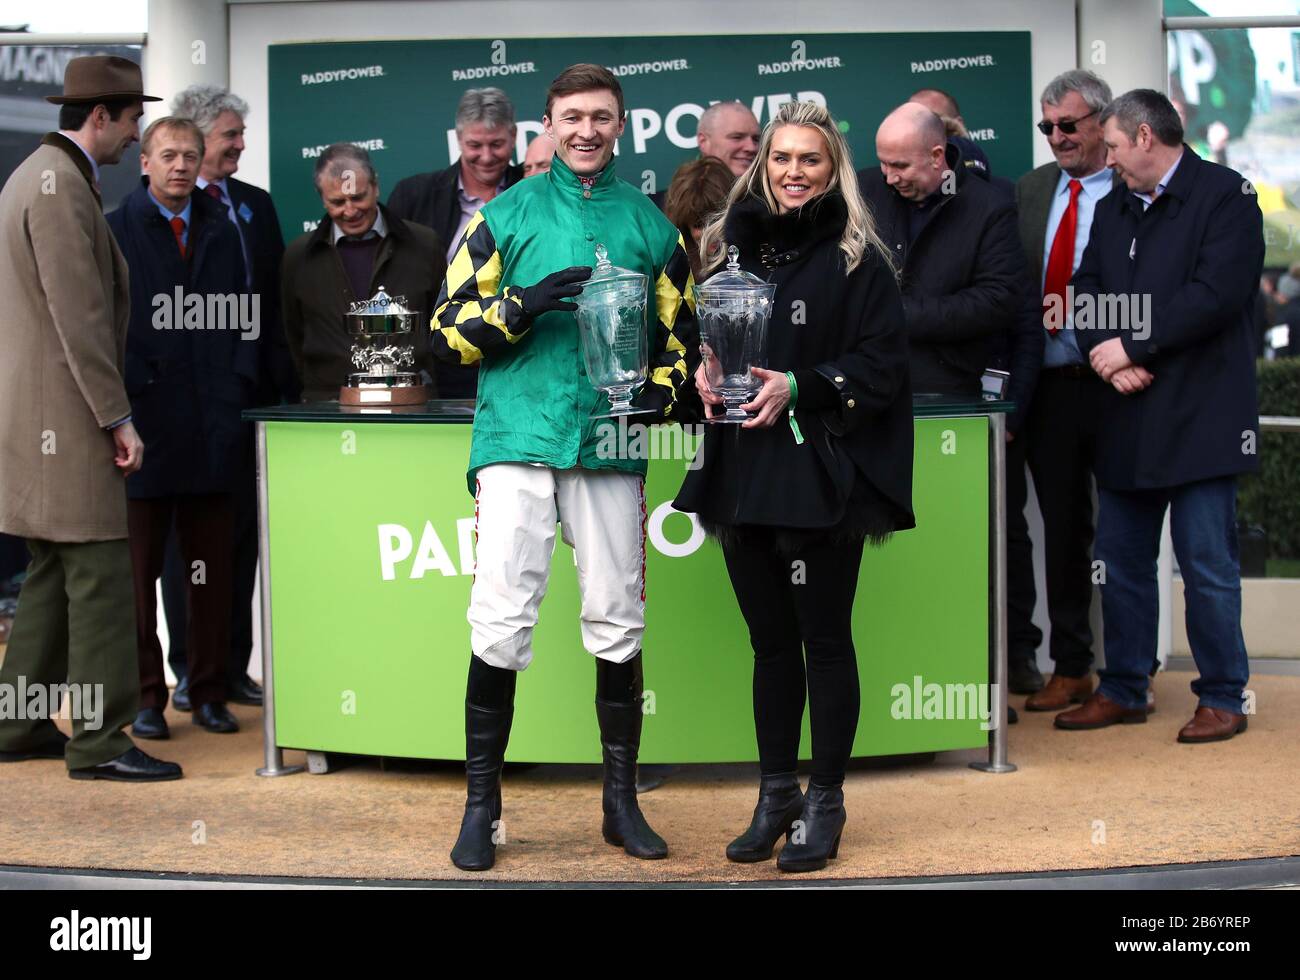 Jockey Adam Wedge celebrates winning the Paddy Power Stayers' Hurdle with trainer Rebecca Curtis during day three of the Cheltenham Festival at Cheltenham Racecourse. Stock Photo